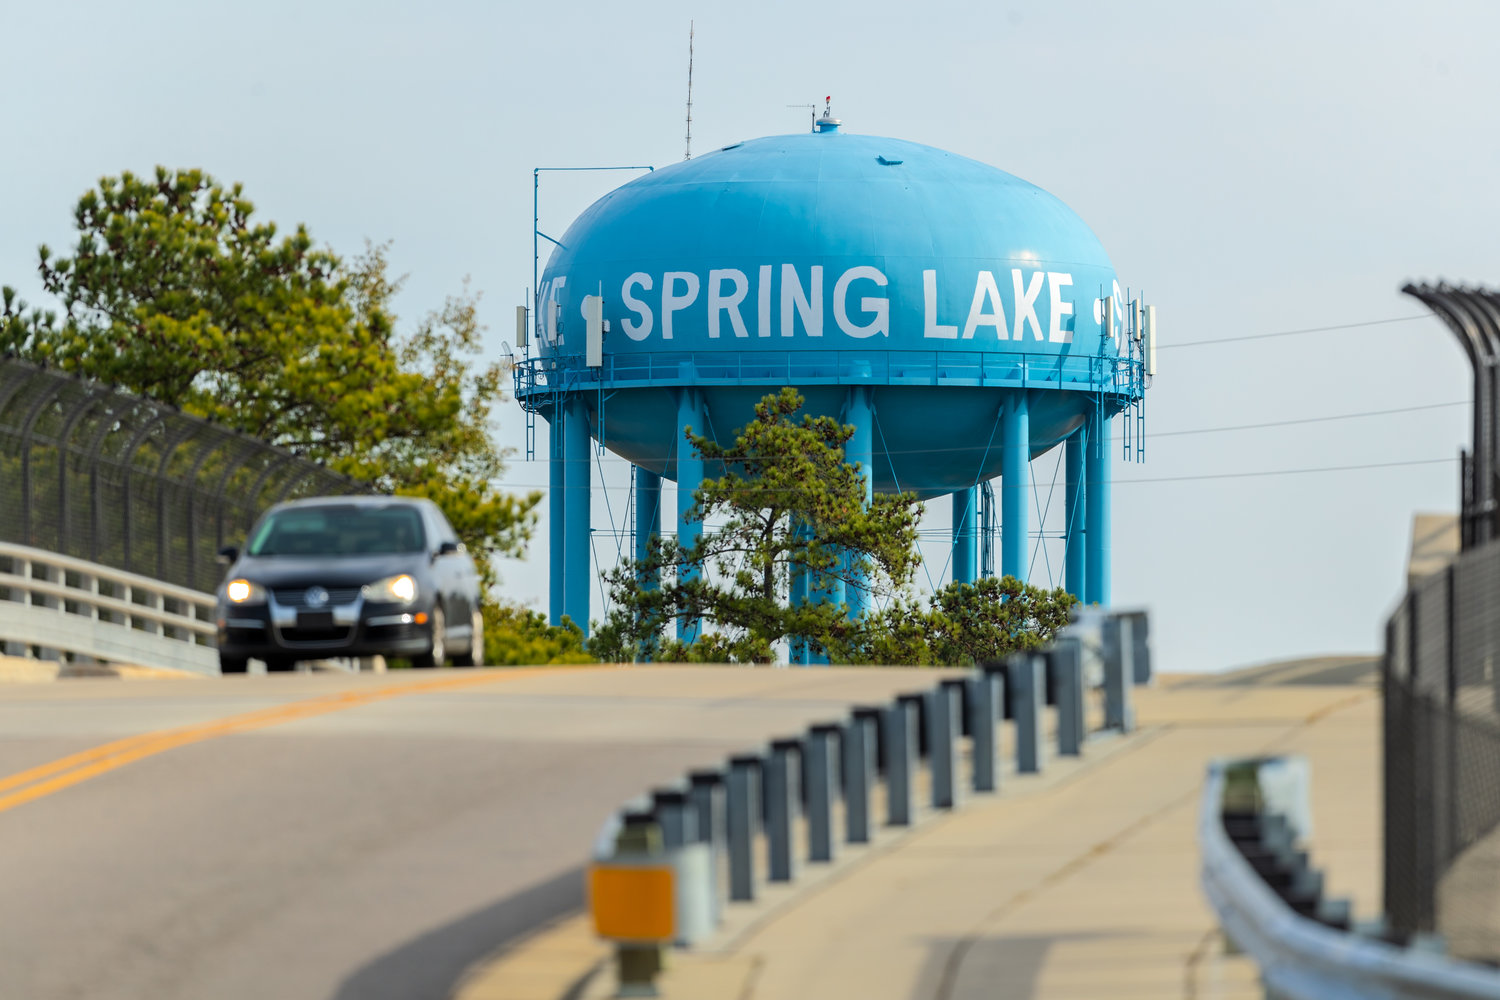 The Spring Lake Board of Aldermen will discuss plans for apartments on Main Street at its meeting Monday night.